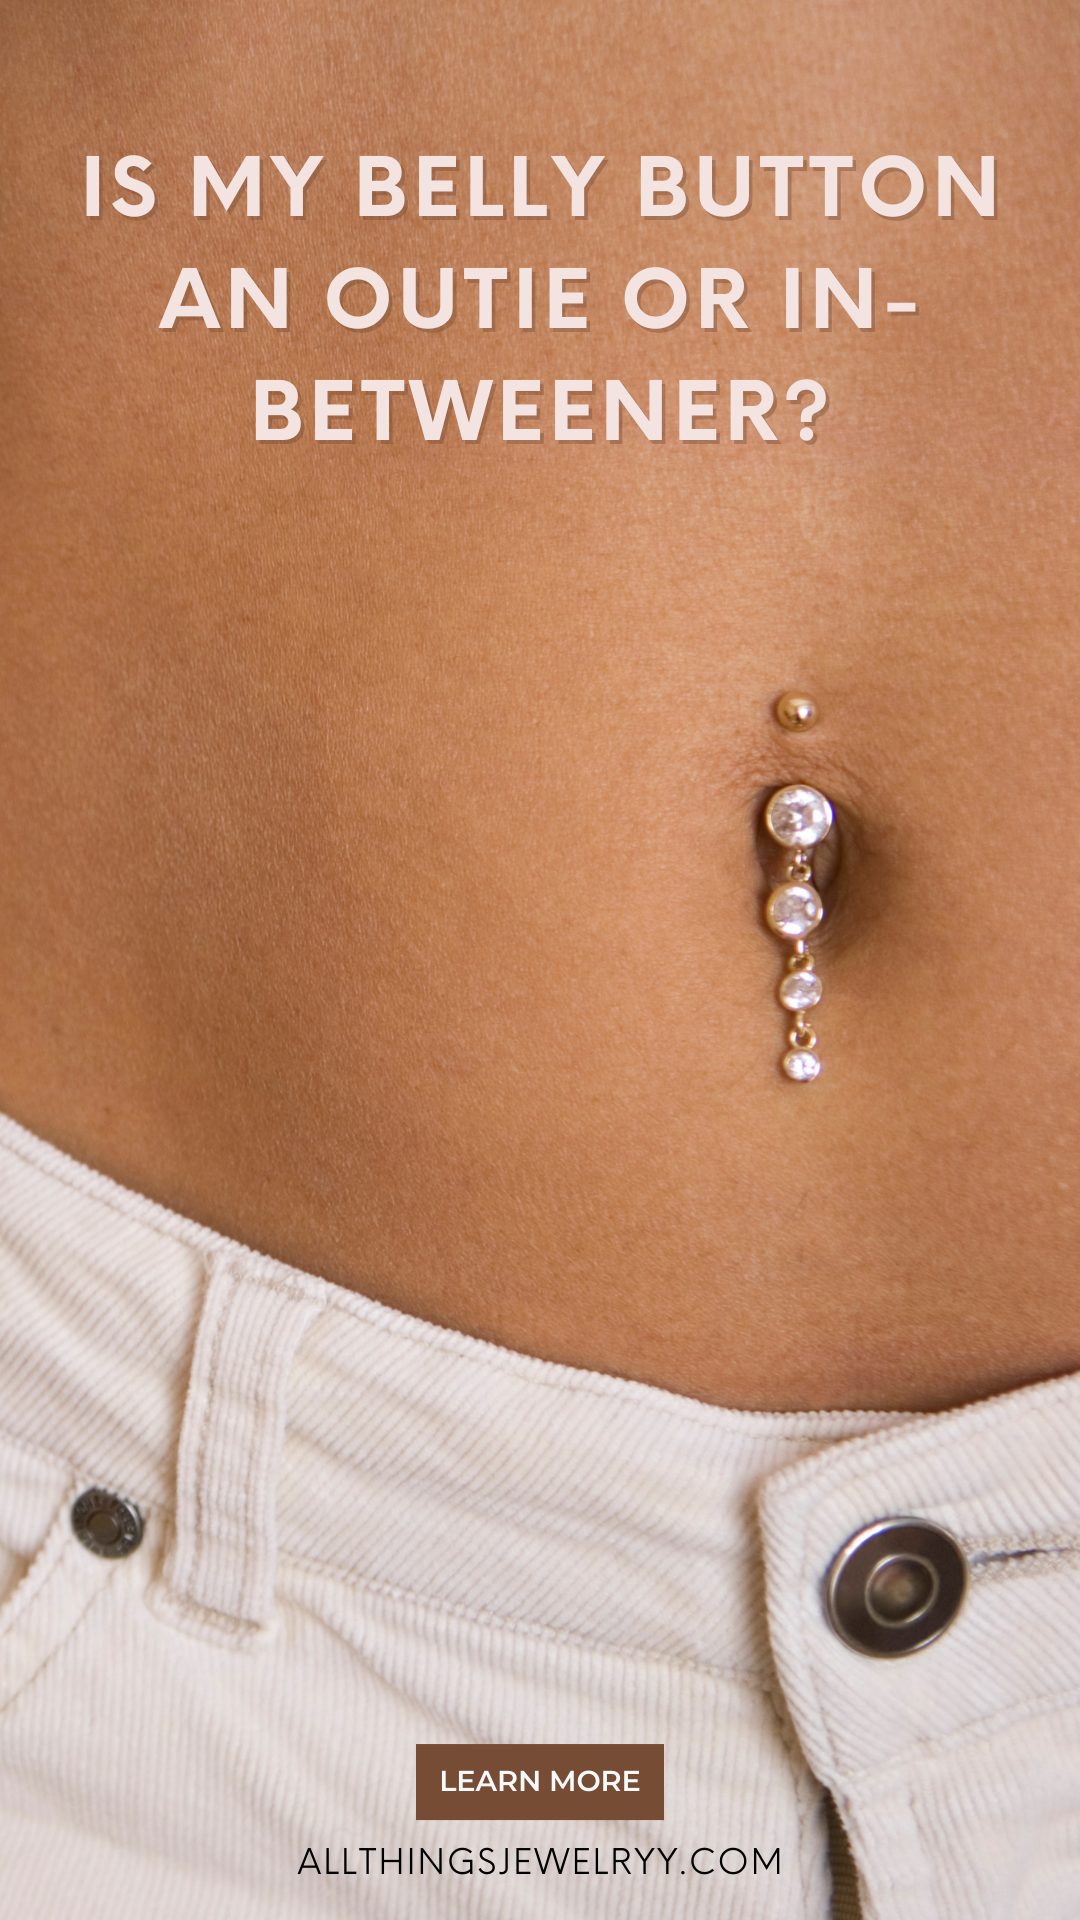 corey mounce recommends Inbetweenie Belly Button Piercing